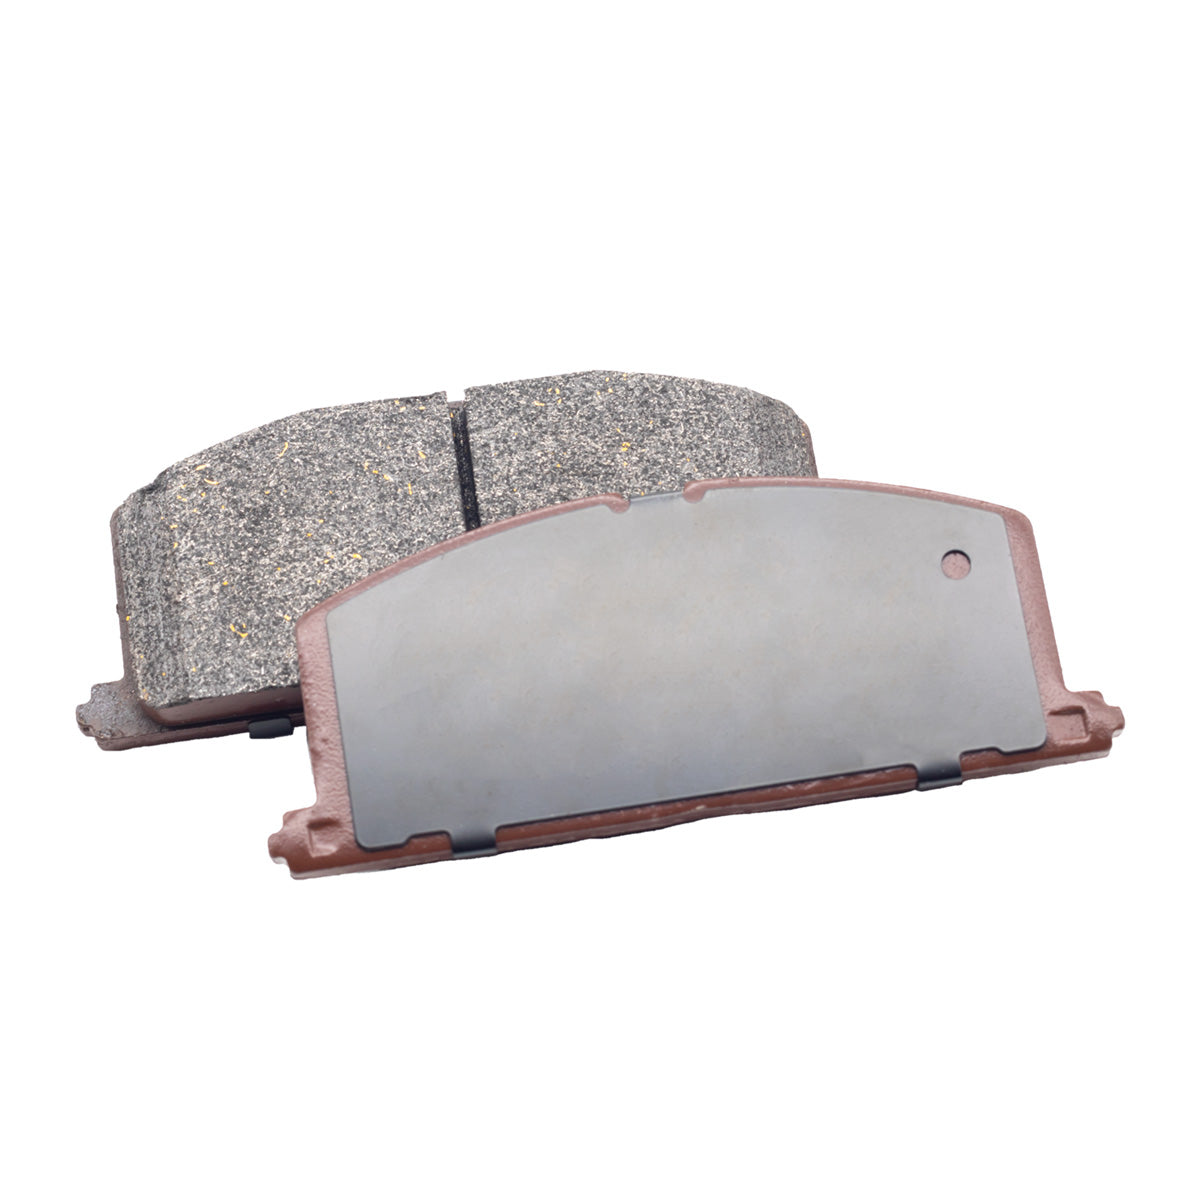 Loosoo is dedicated to manufacture brake pads with specific premium materials, ensuring exceptional stopping power and quiet operation with low dust. We have advanced production, research, and testing equipments and have developed a series of car brake pads and rotors with various formulations to meet the different needs of various countries.